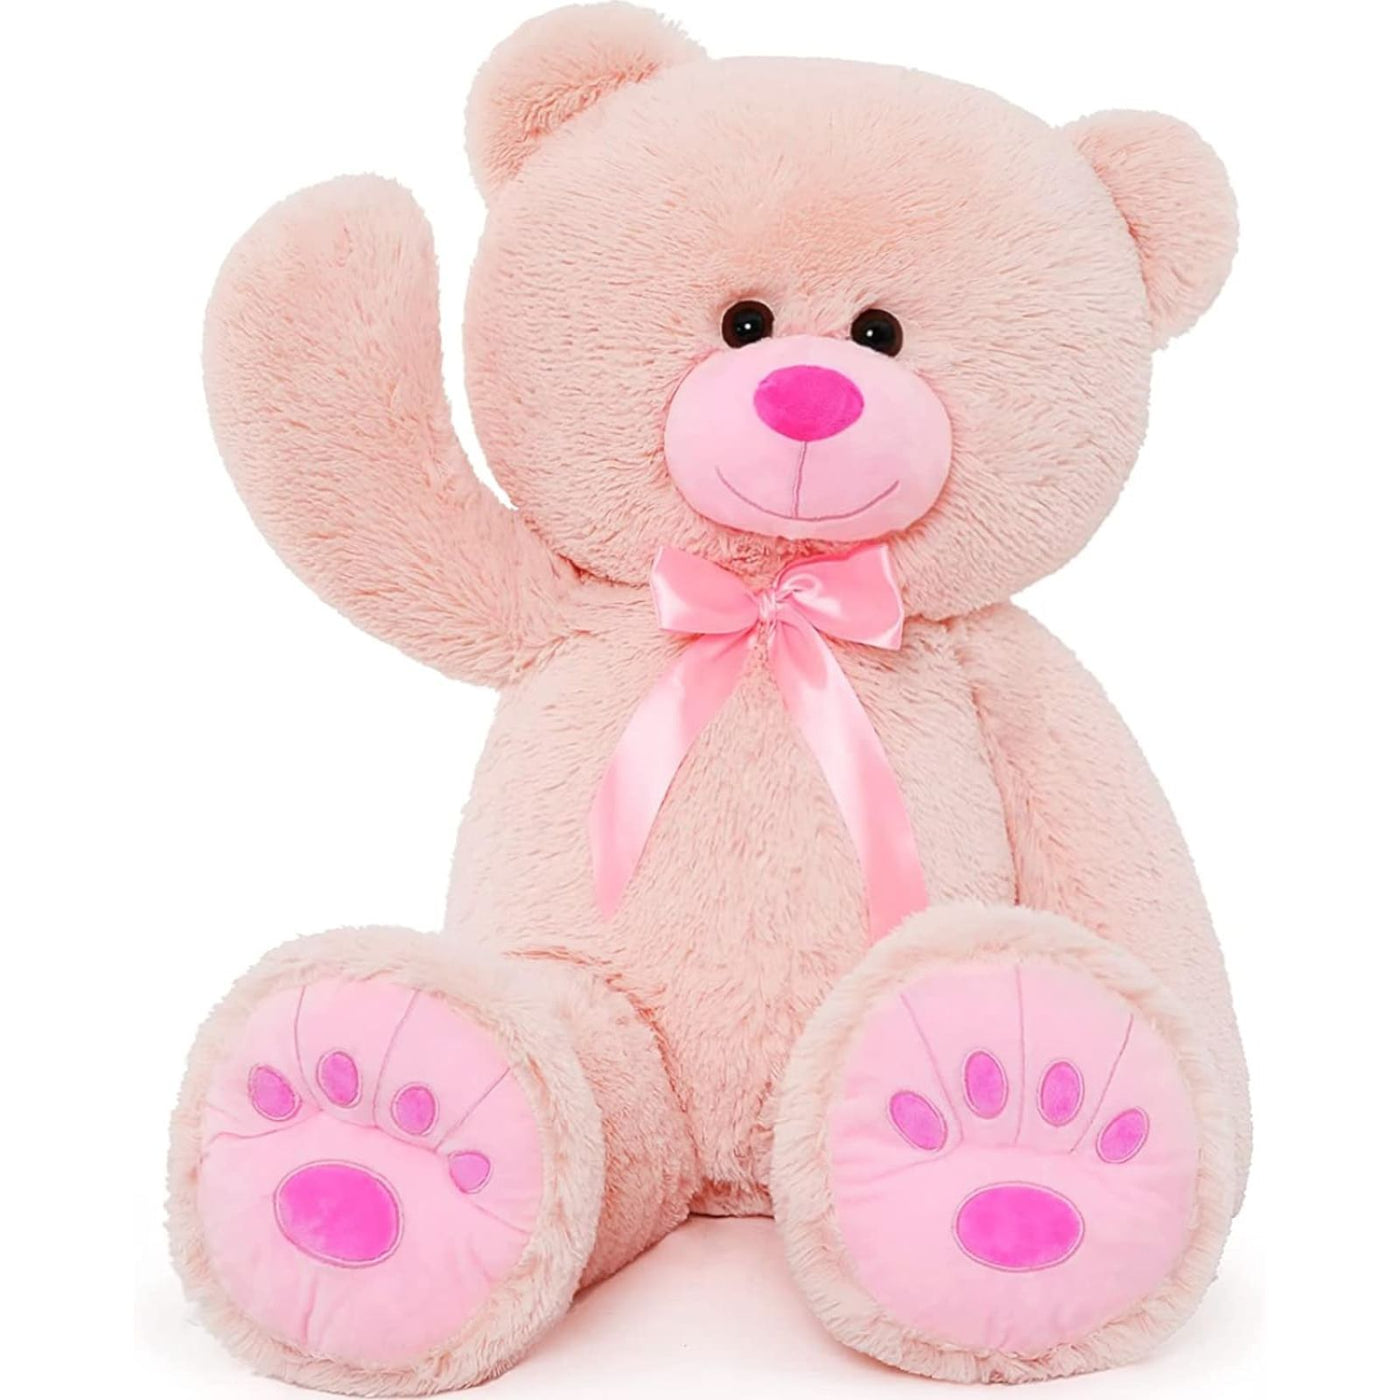 Giant Pink Teddy Bear Plush Toy, 35.4 Inches